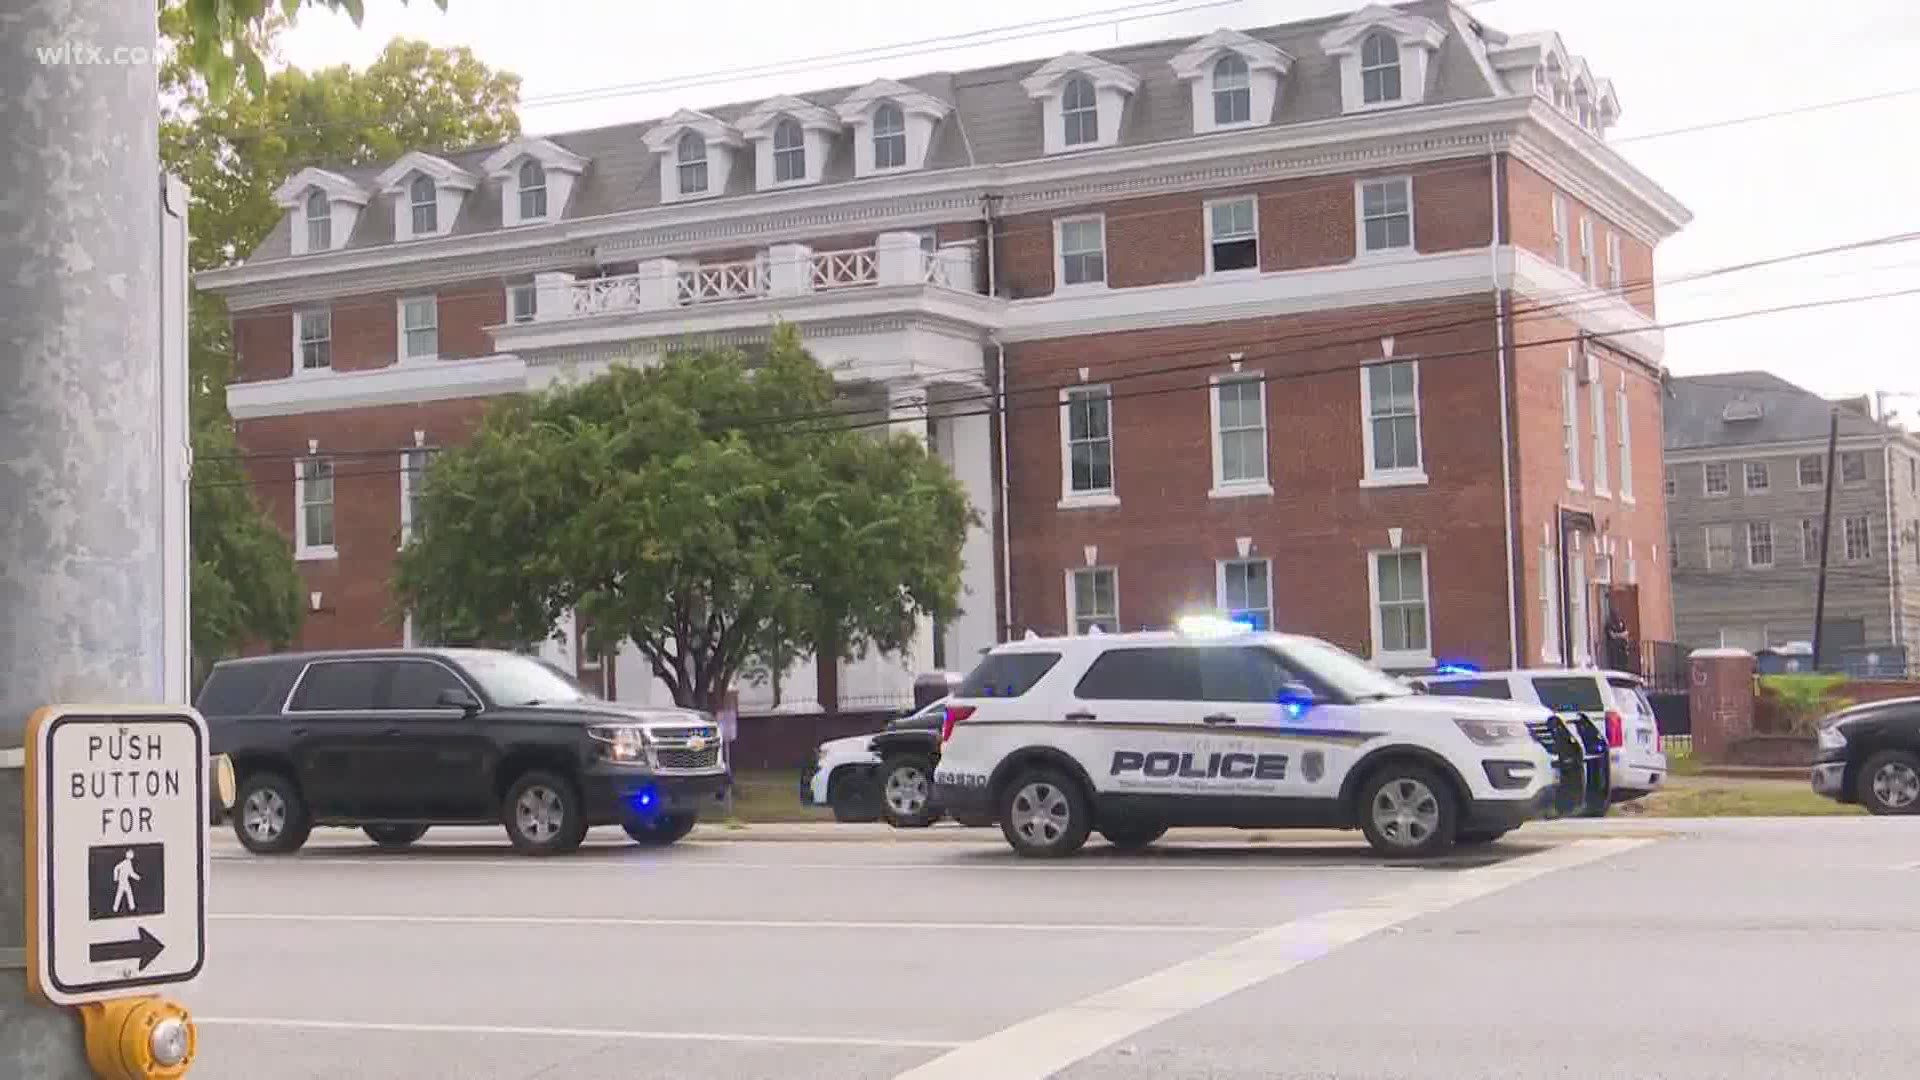 State agents are investigating a report of shots fired near Allen University that's said to be officer-involved.